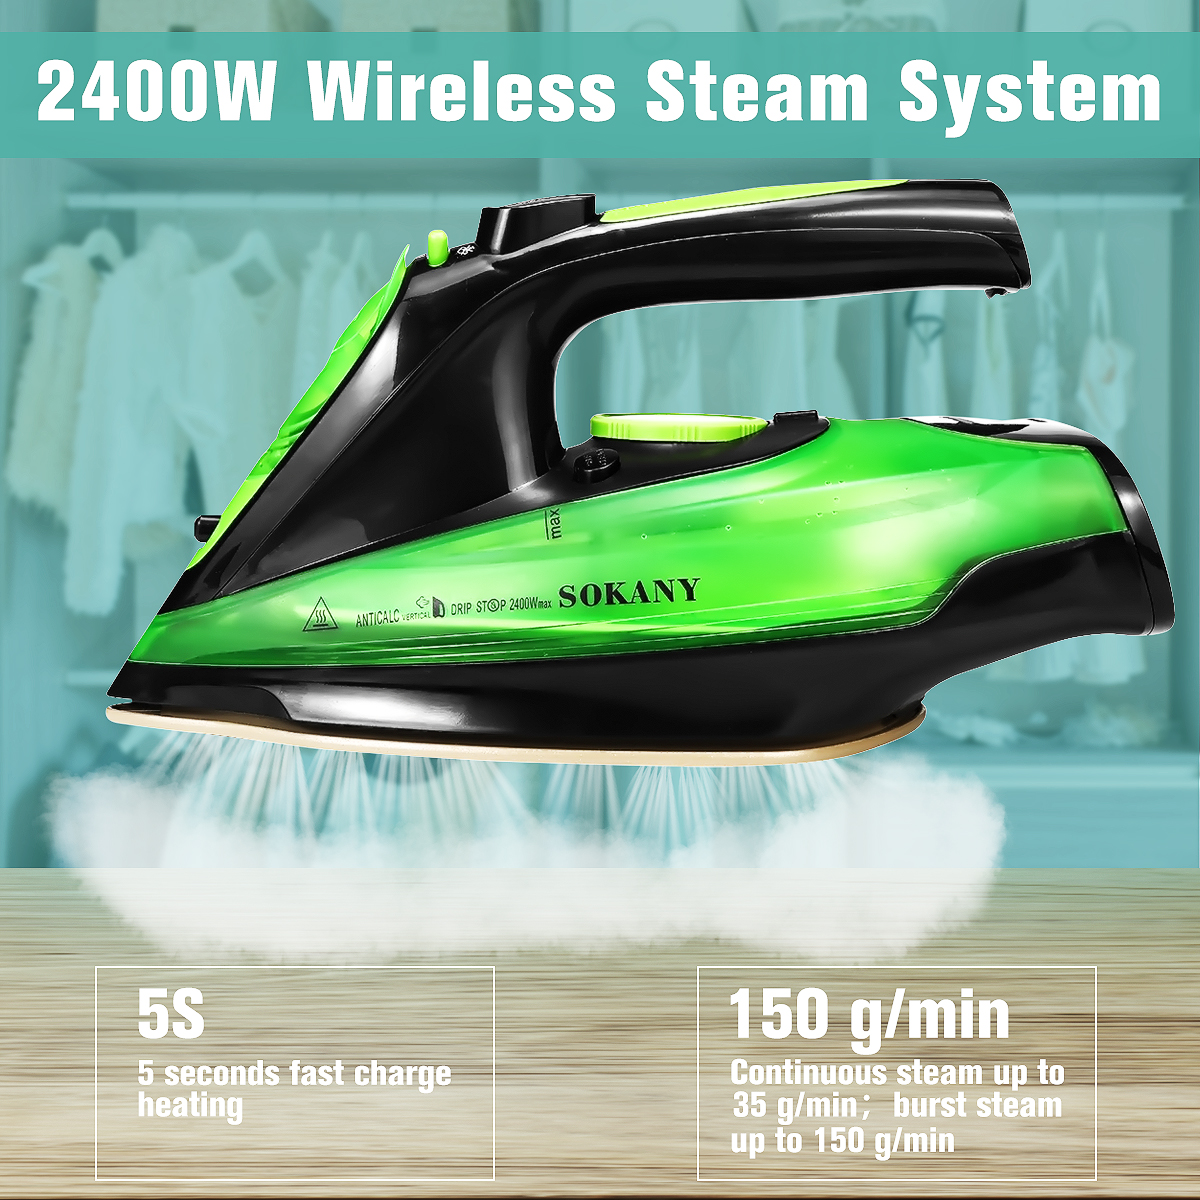 2400W-220V-Cordless-Steam-Iron-Multifunction-Clothes-Docking-Station-Dry-Ironing-Industry-1346803-5